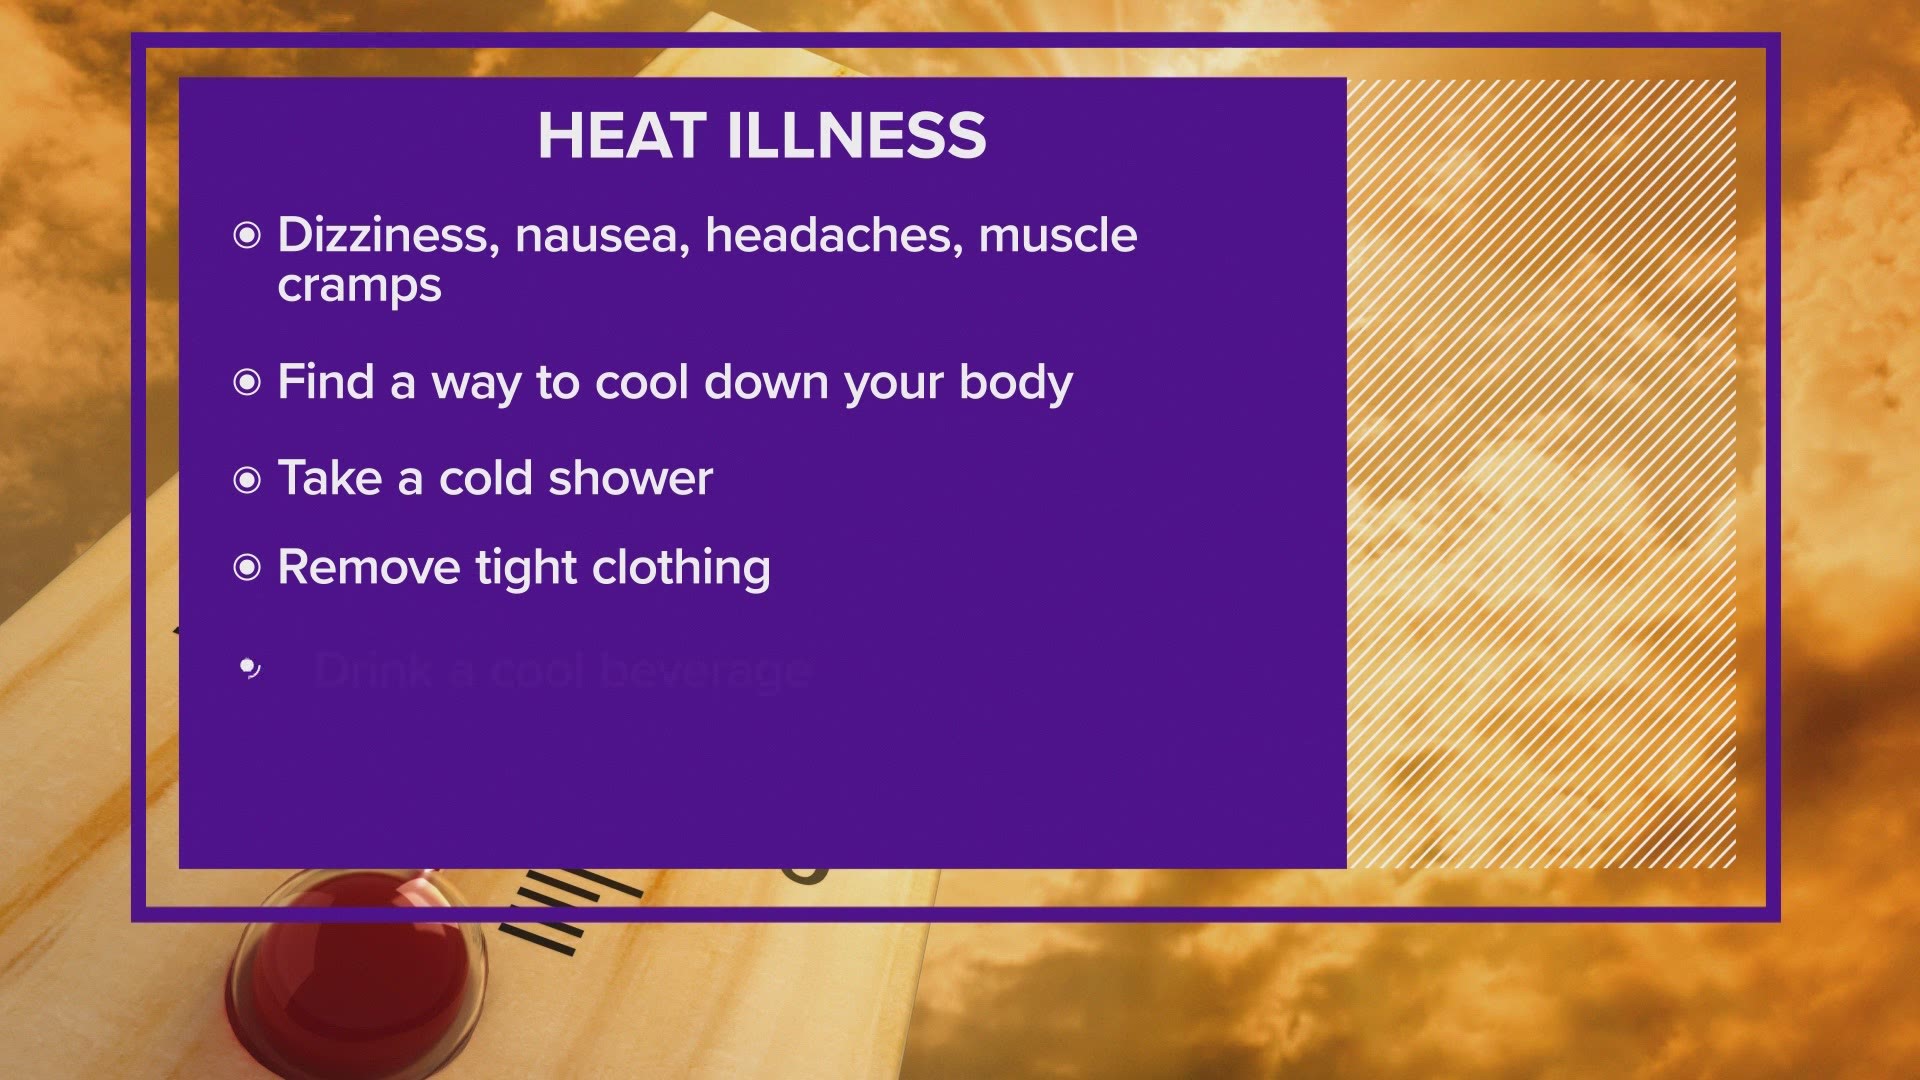 A Seattle doctor offers tips to prevent heat stroke and dehydration as hot weather approaches this weekend.